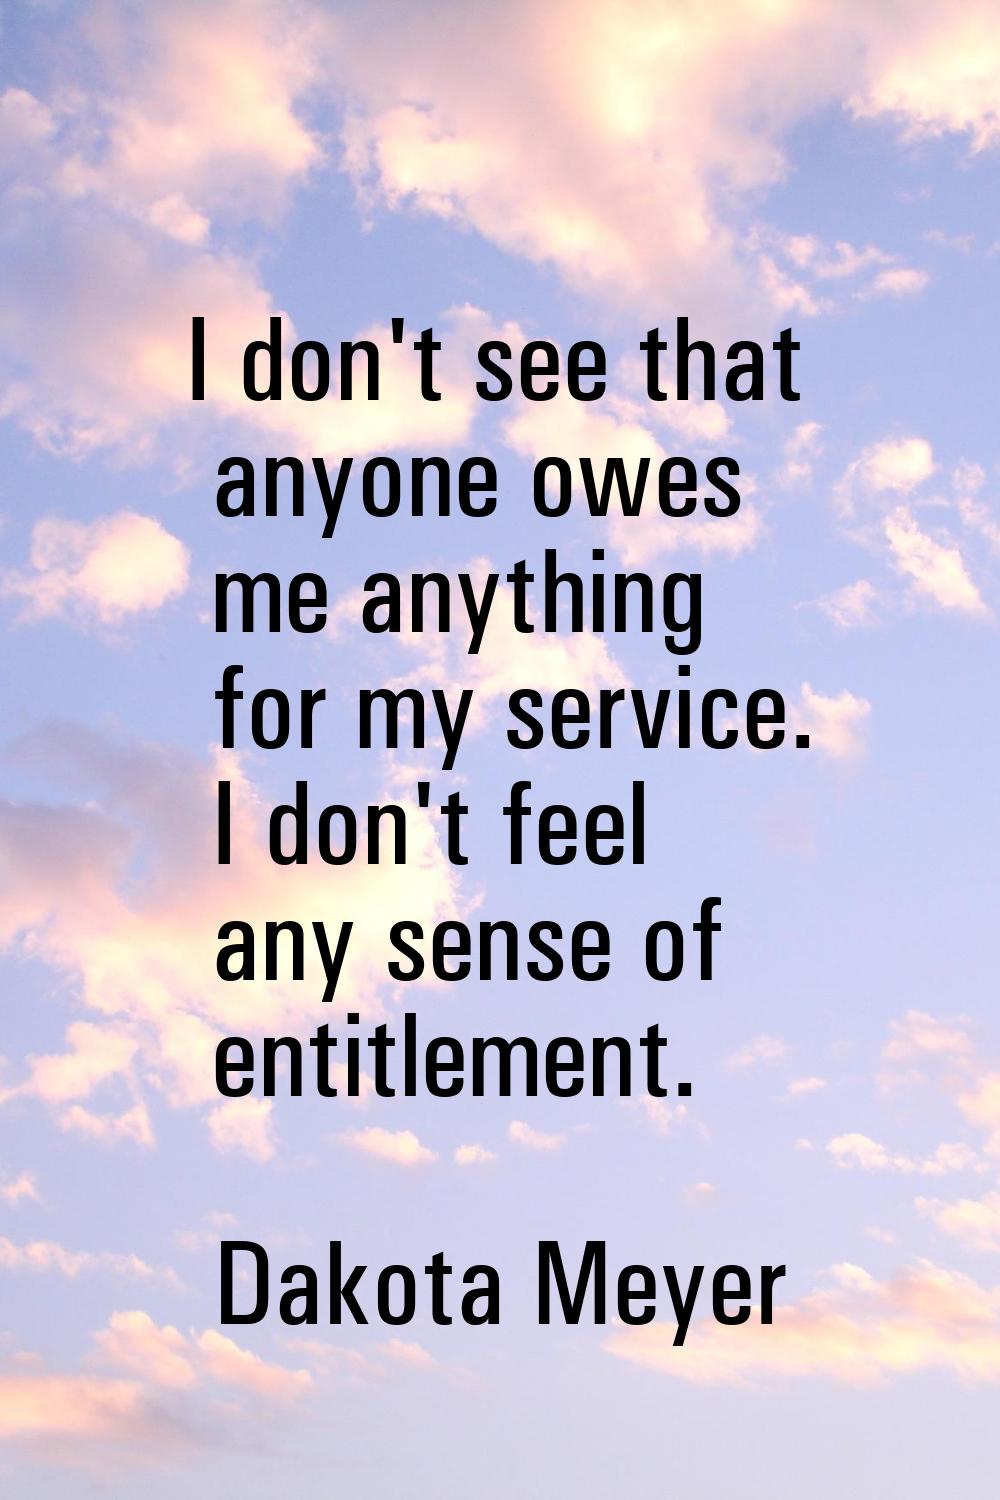 I don't see that anyone owes me anything for my service. I don't feel any sense of entitlement.